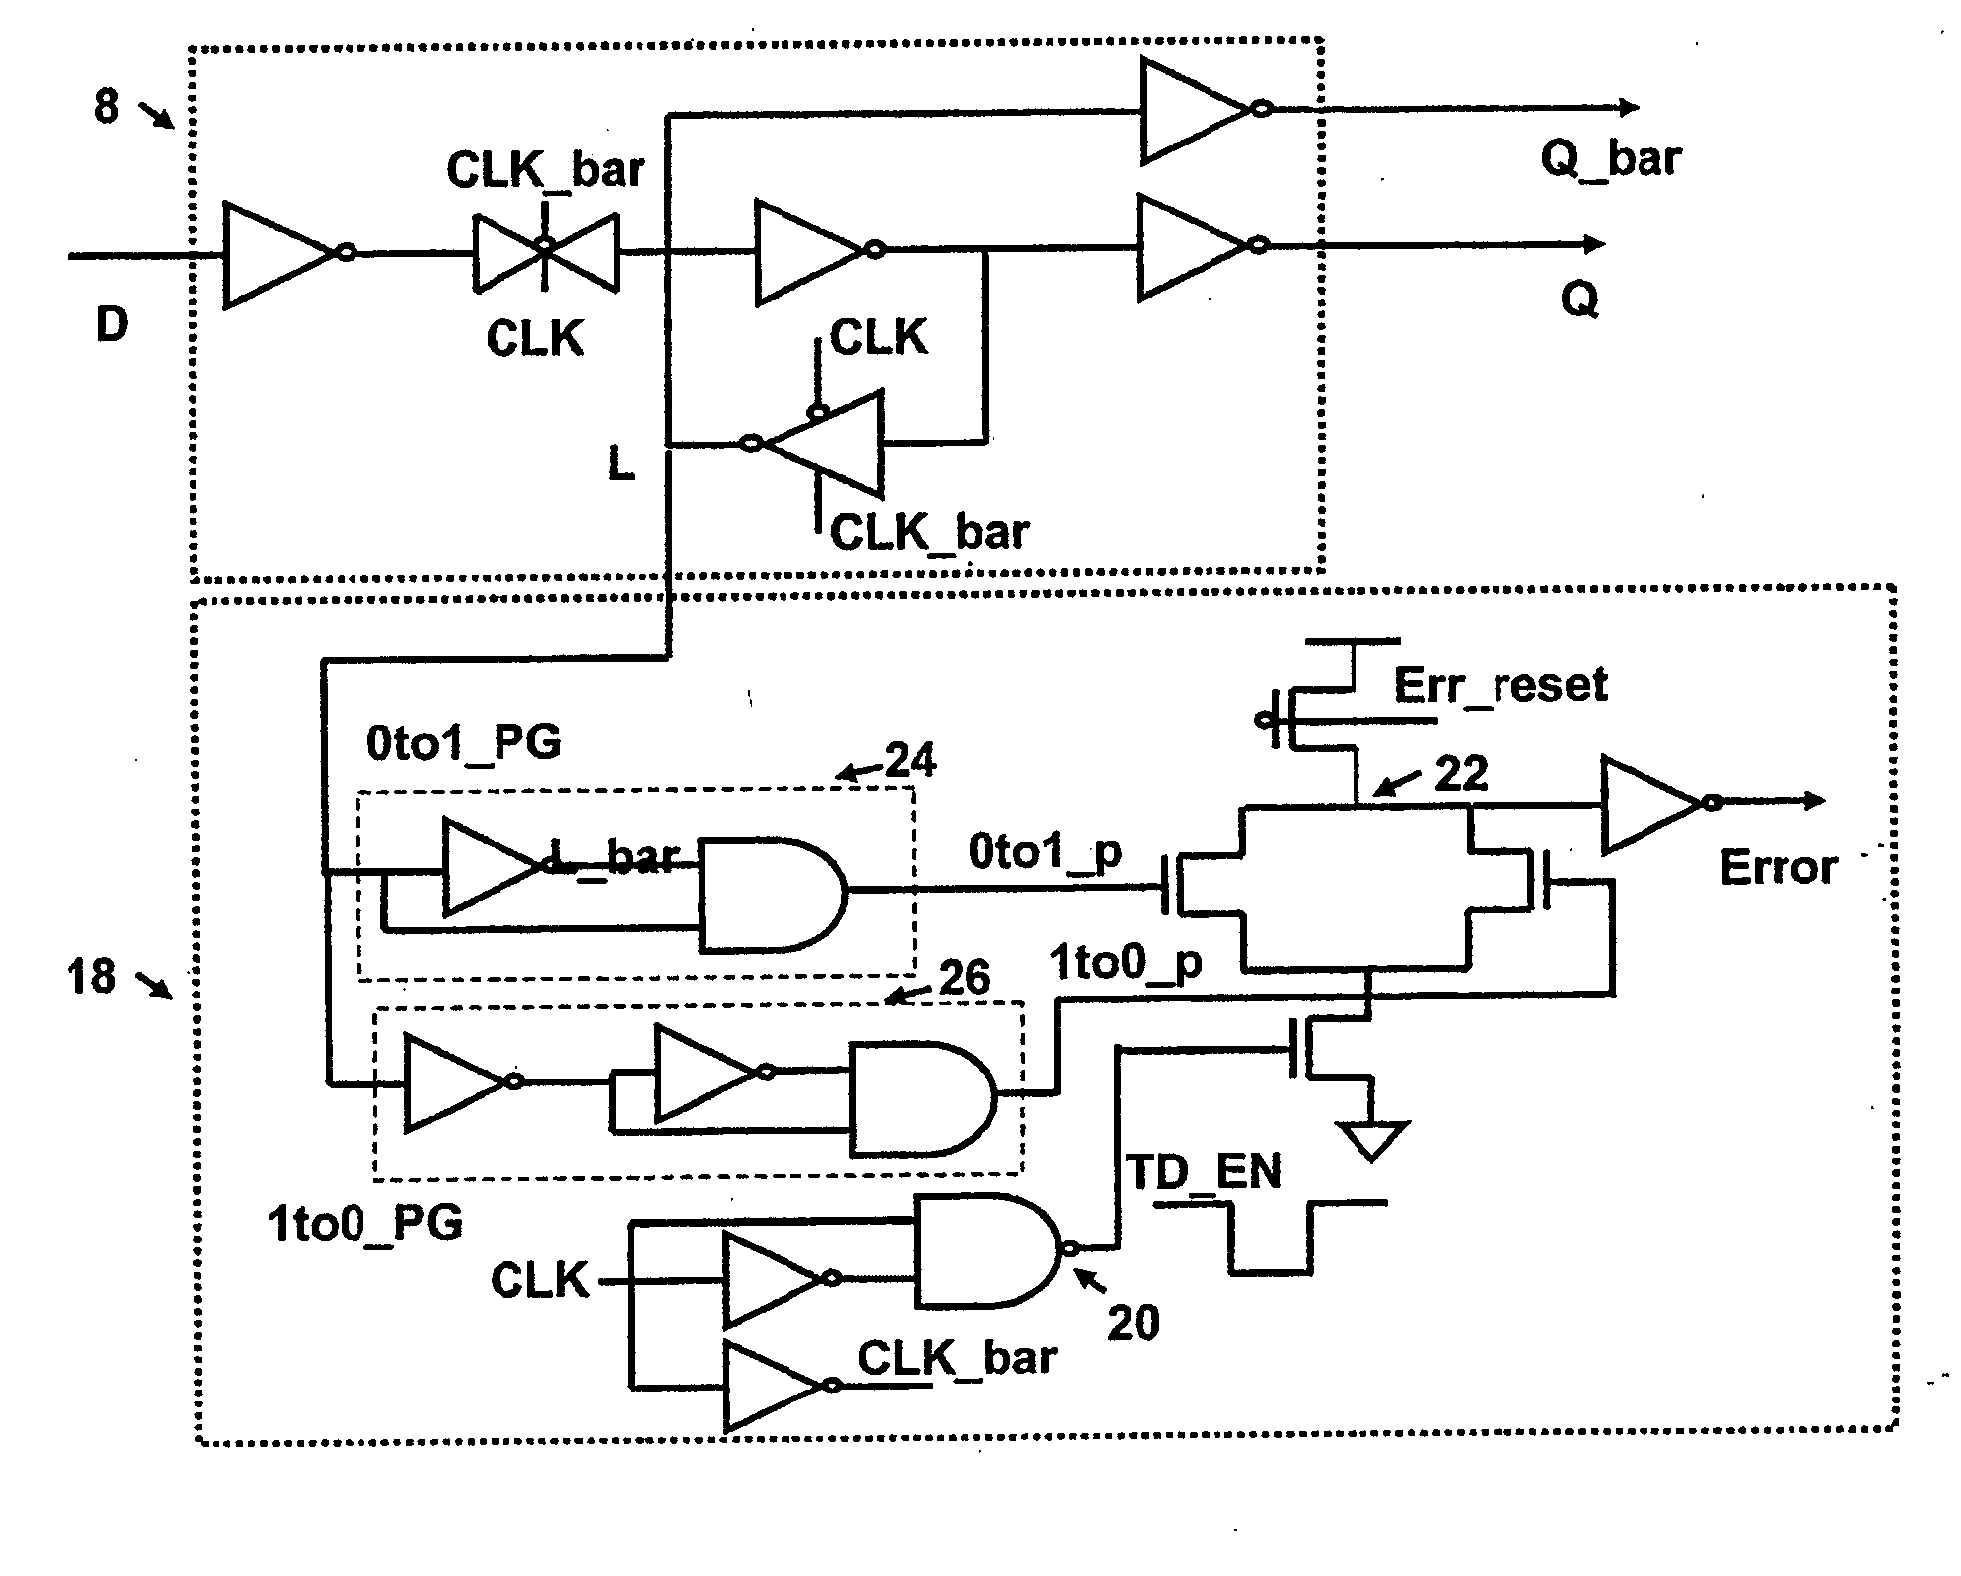 Single event upset error detection within an integrated circuit